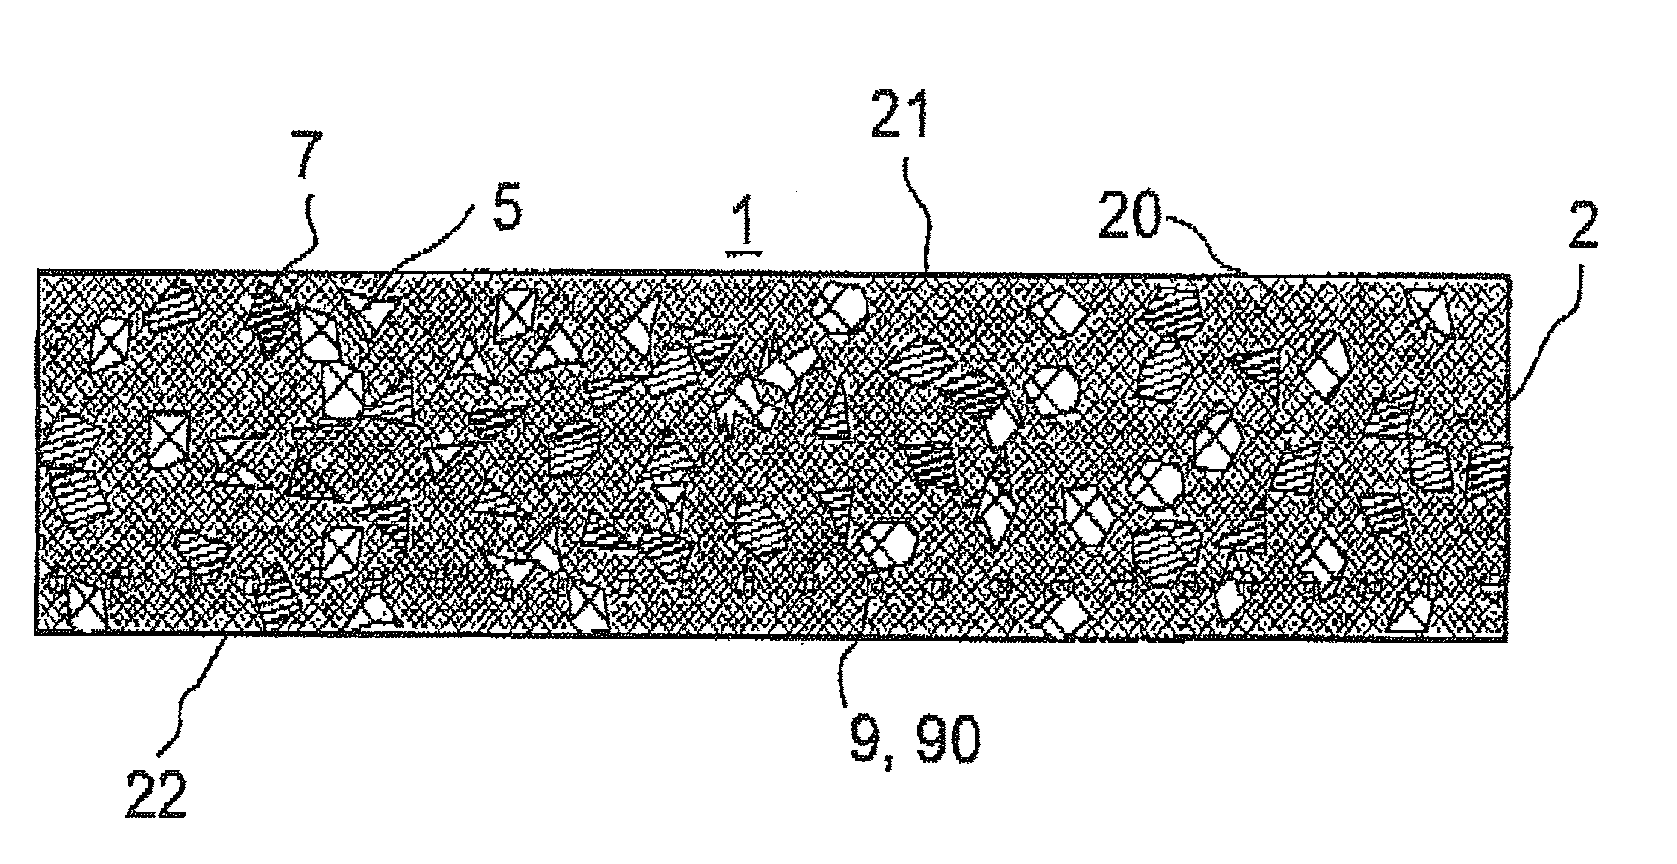 Armor material and method for producing it